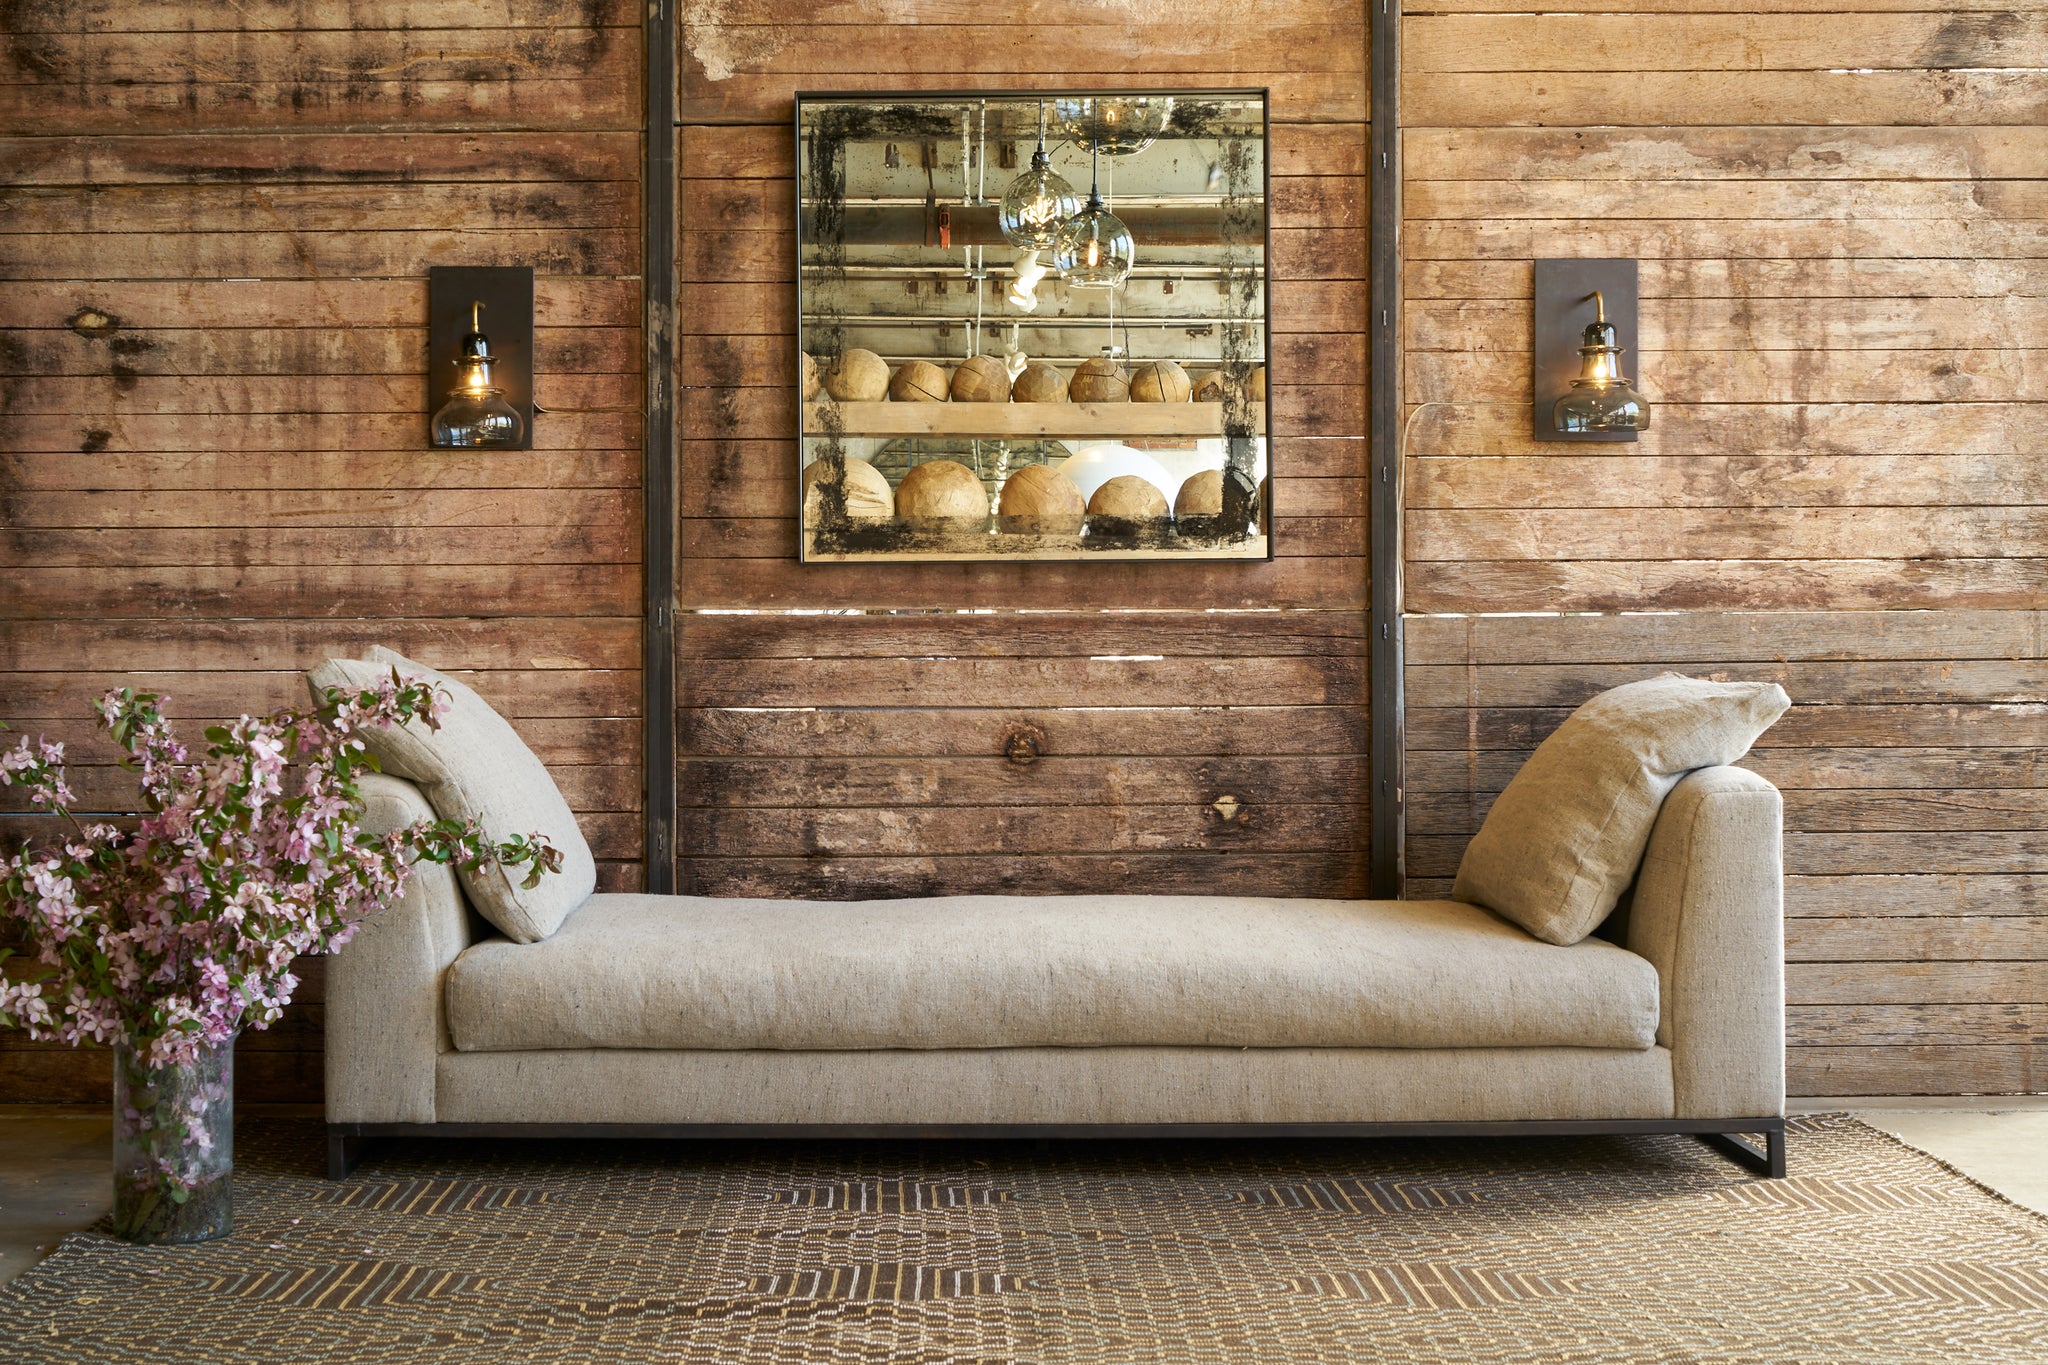  A daybed in front of a wood wall with a square mirror. Photographed in Andrews Burlap 